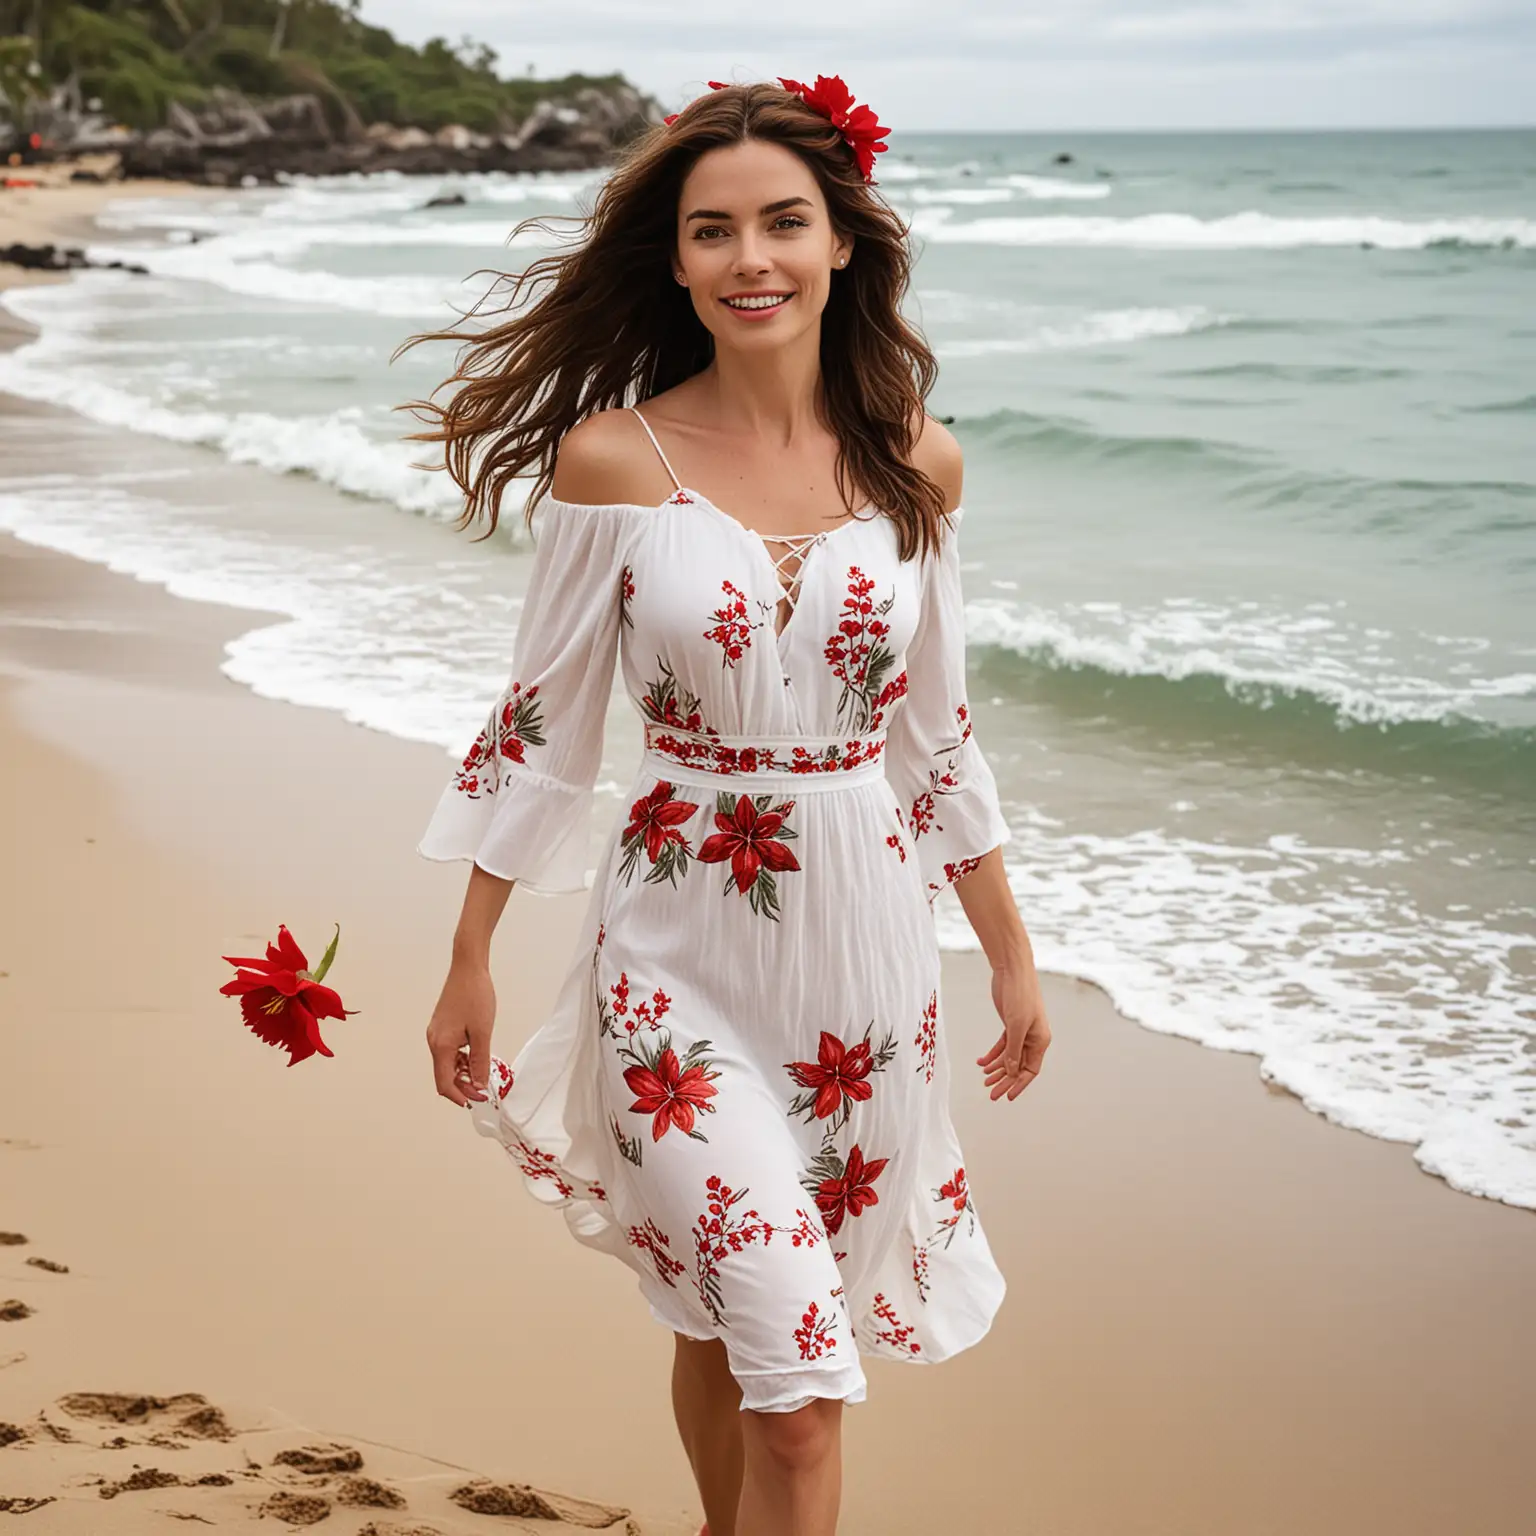 A slim realistic Amelia Heinle cheveux bruns foncé regarde amoureusement sourire rafraîchissant wearing a 2 piece white tropical dress with a red flower in her long hair walking at the beach showing a full body shot from the top of his head to his feet